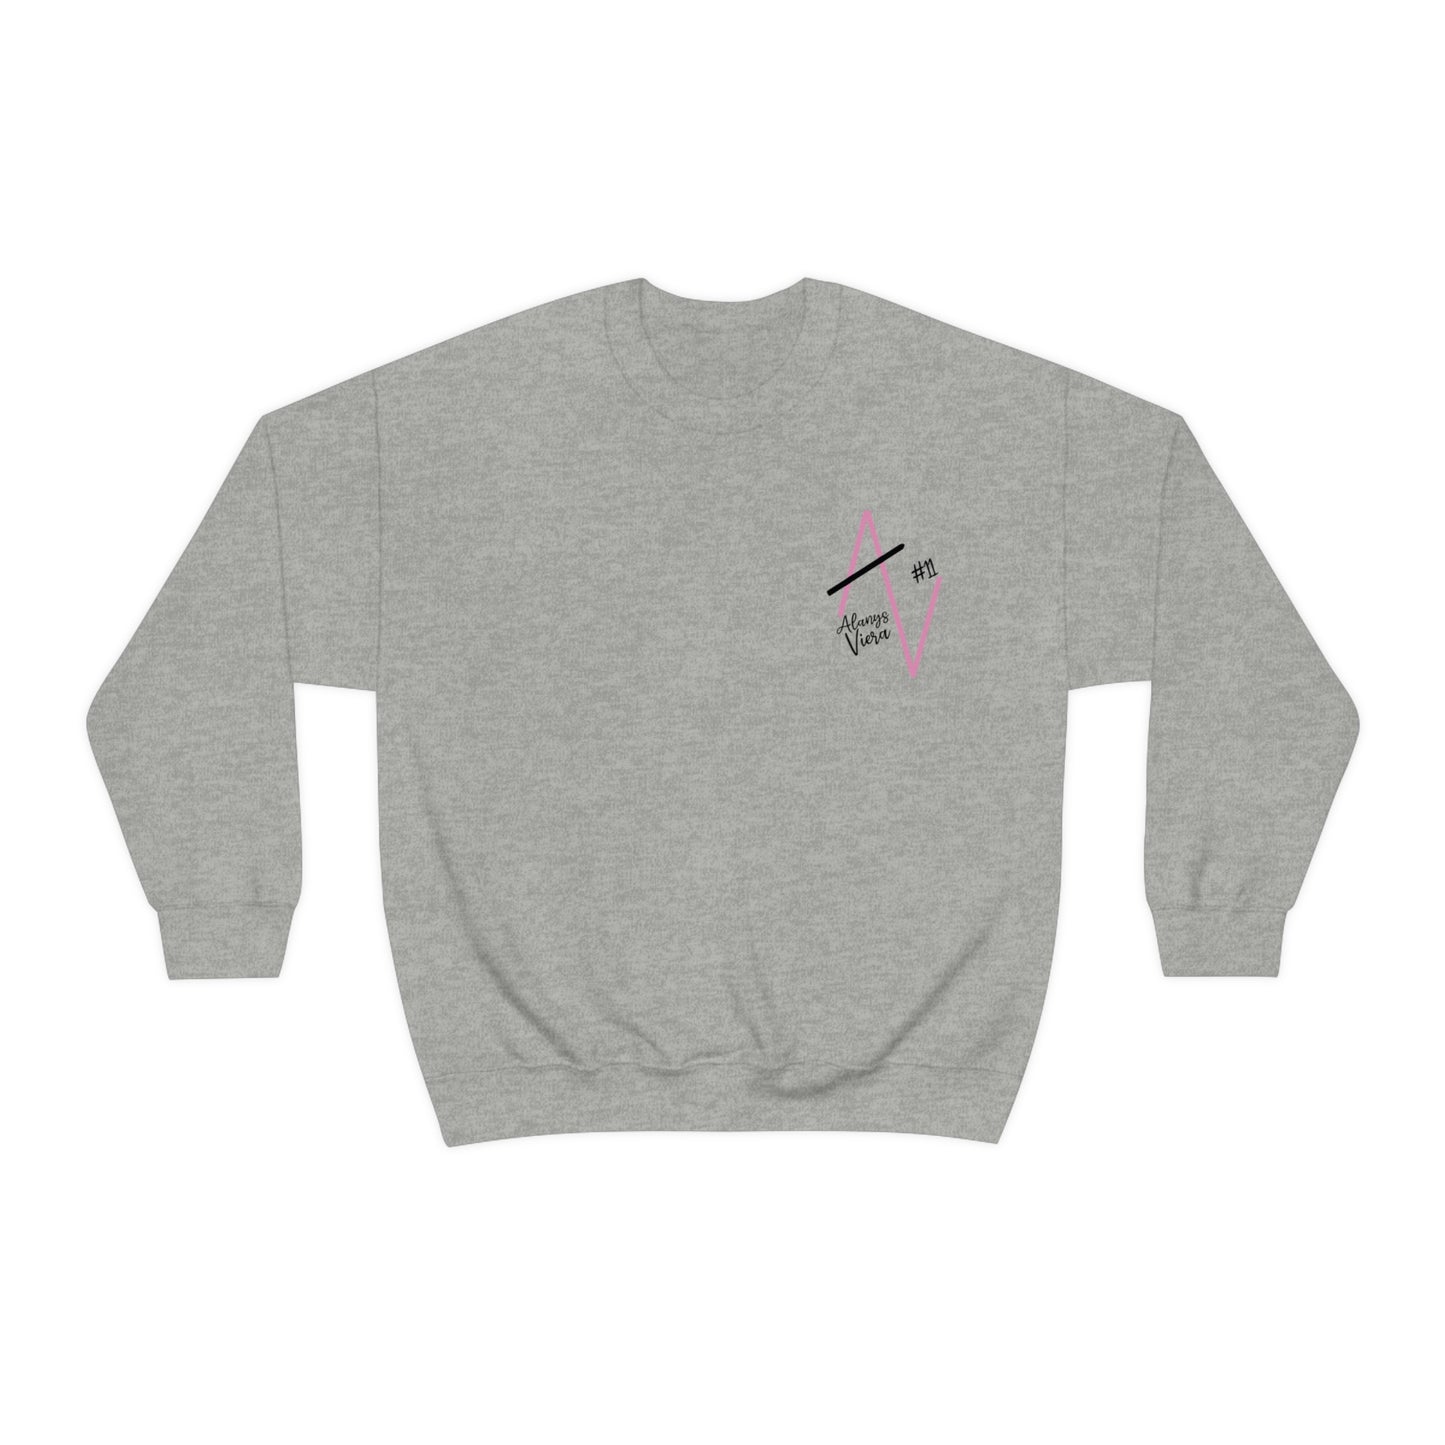 Alanys Viera: Obsession Beats Talent Every Time Crewneck